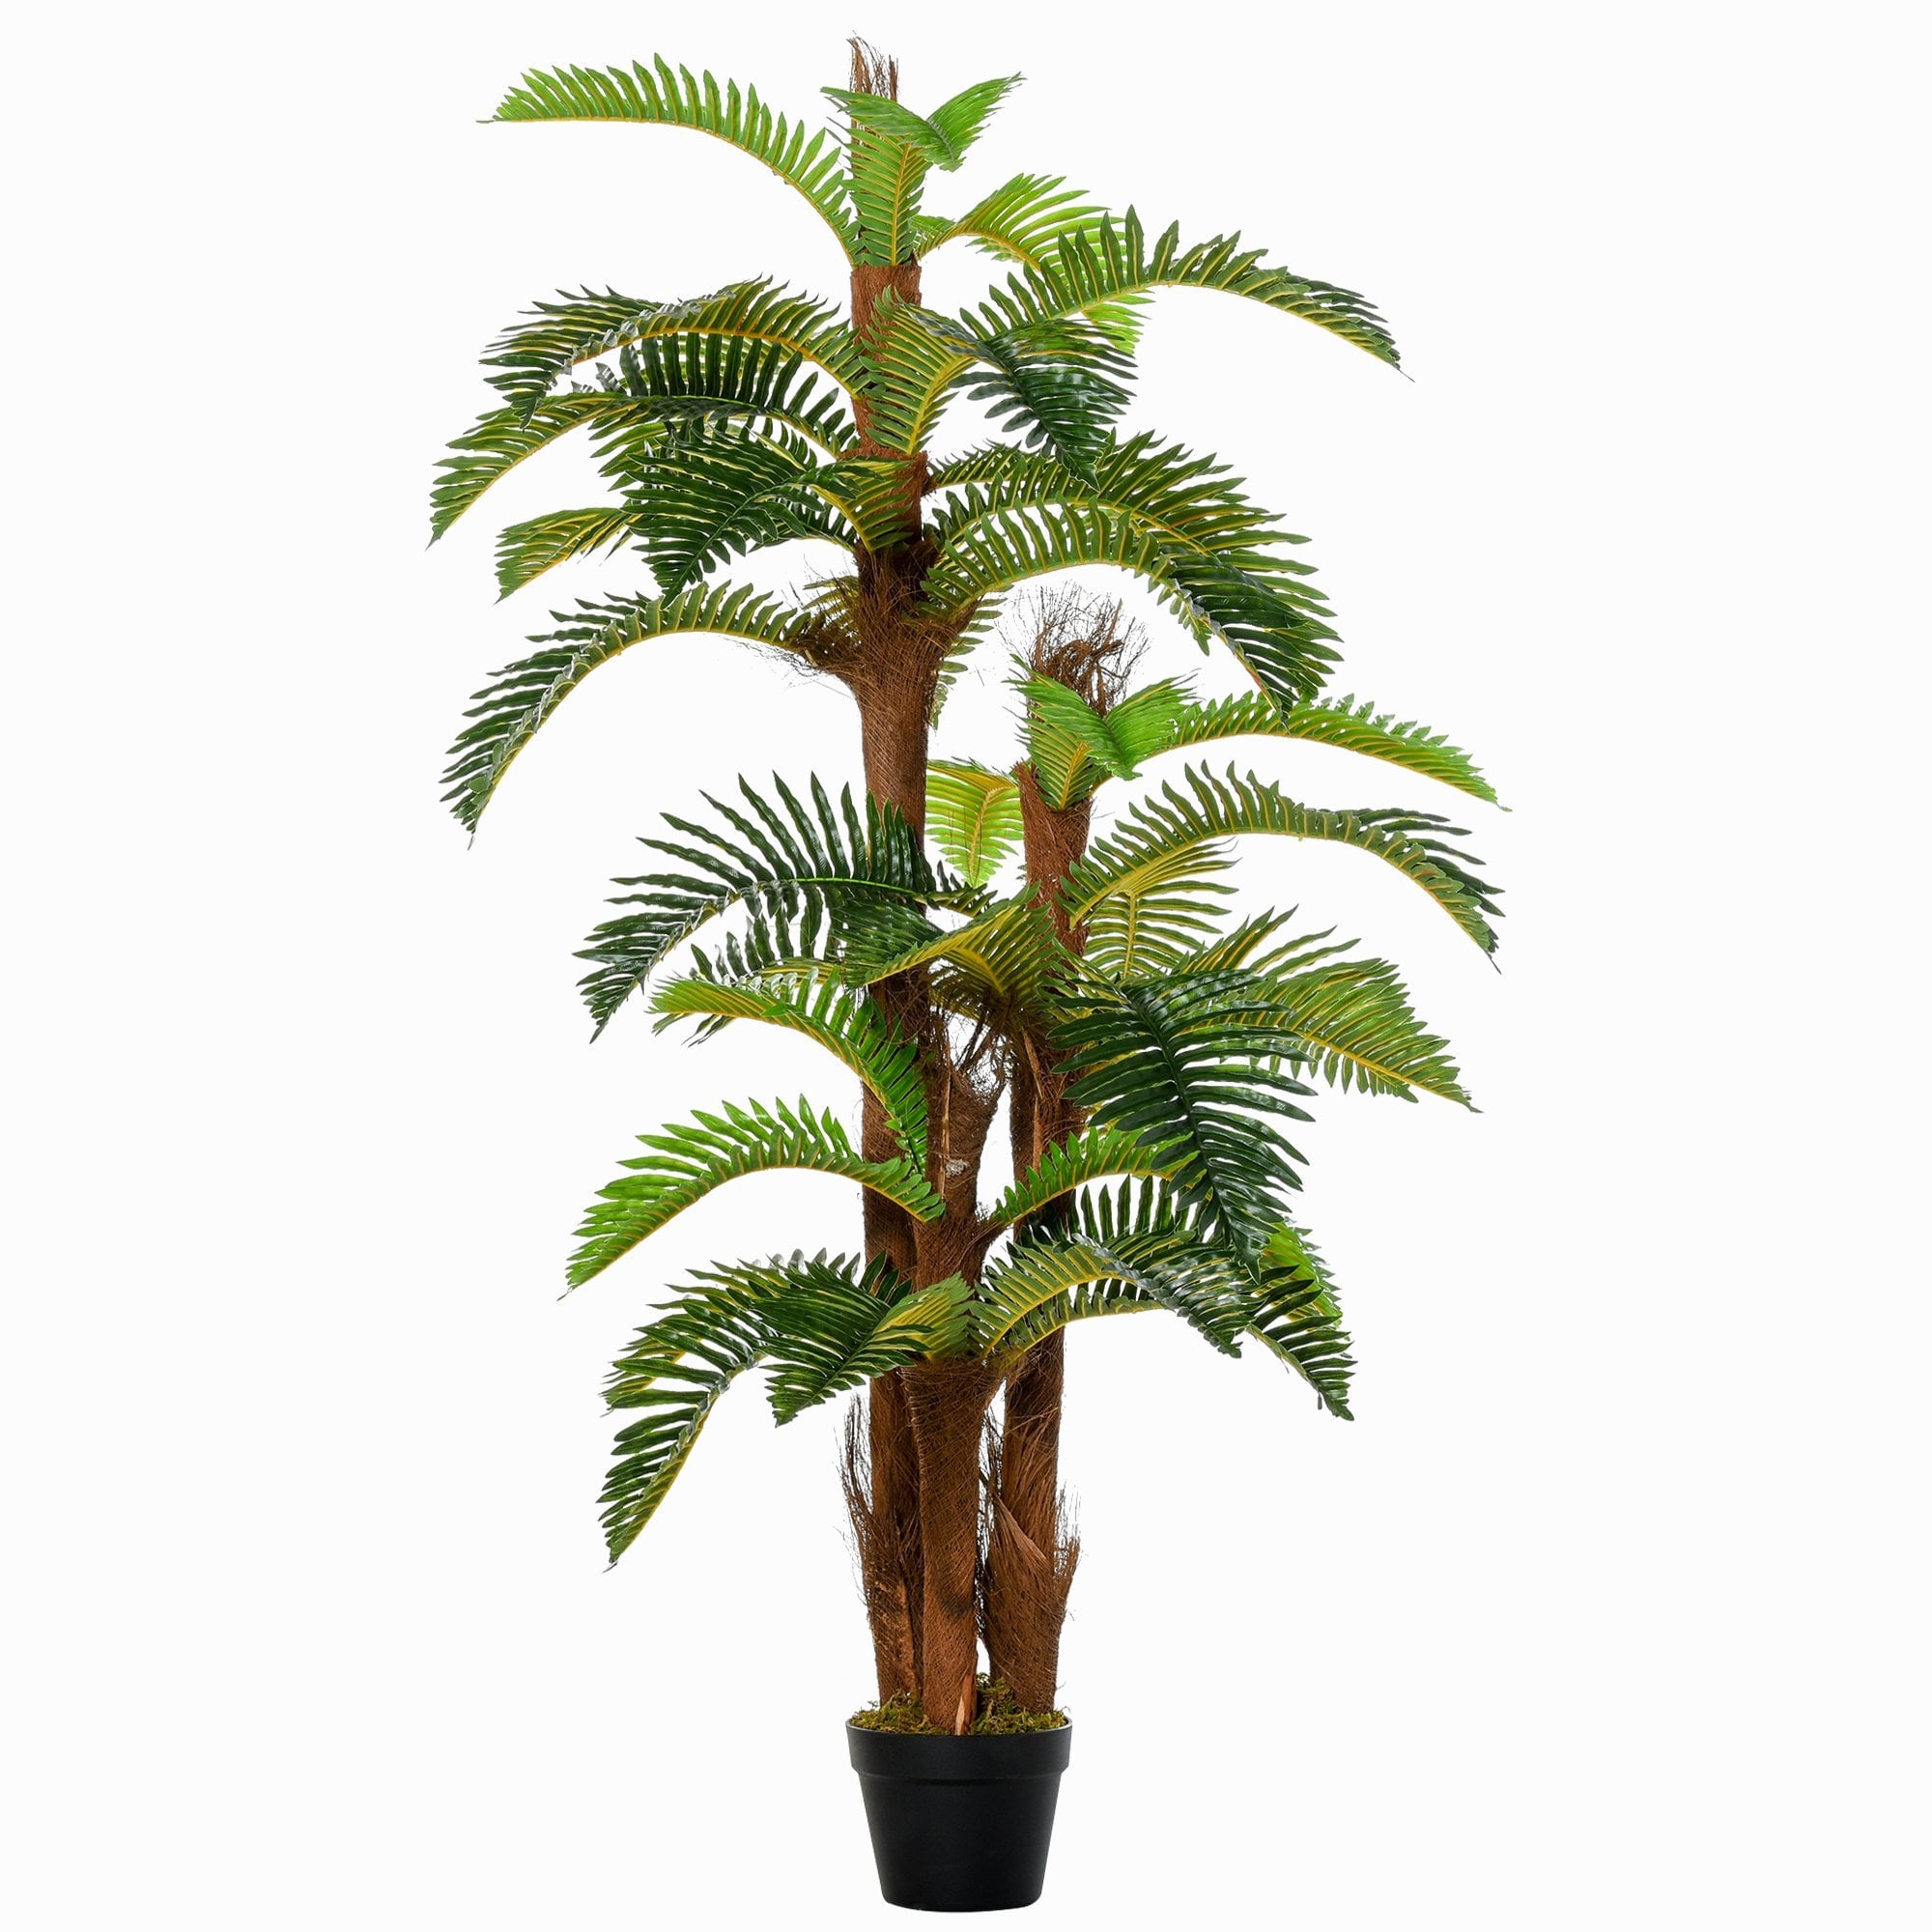 Outsunny Artificial Fern Tree Decorative Plant 36 Leaves with Nursery Pot - Fake Plant for Indoor Outdoor D+cor - 150cm in Pot  | TJ Hughes